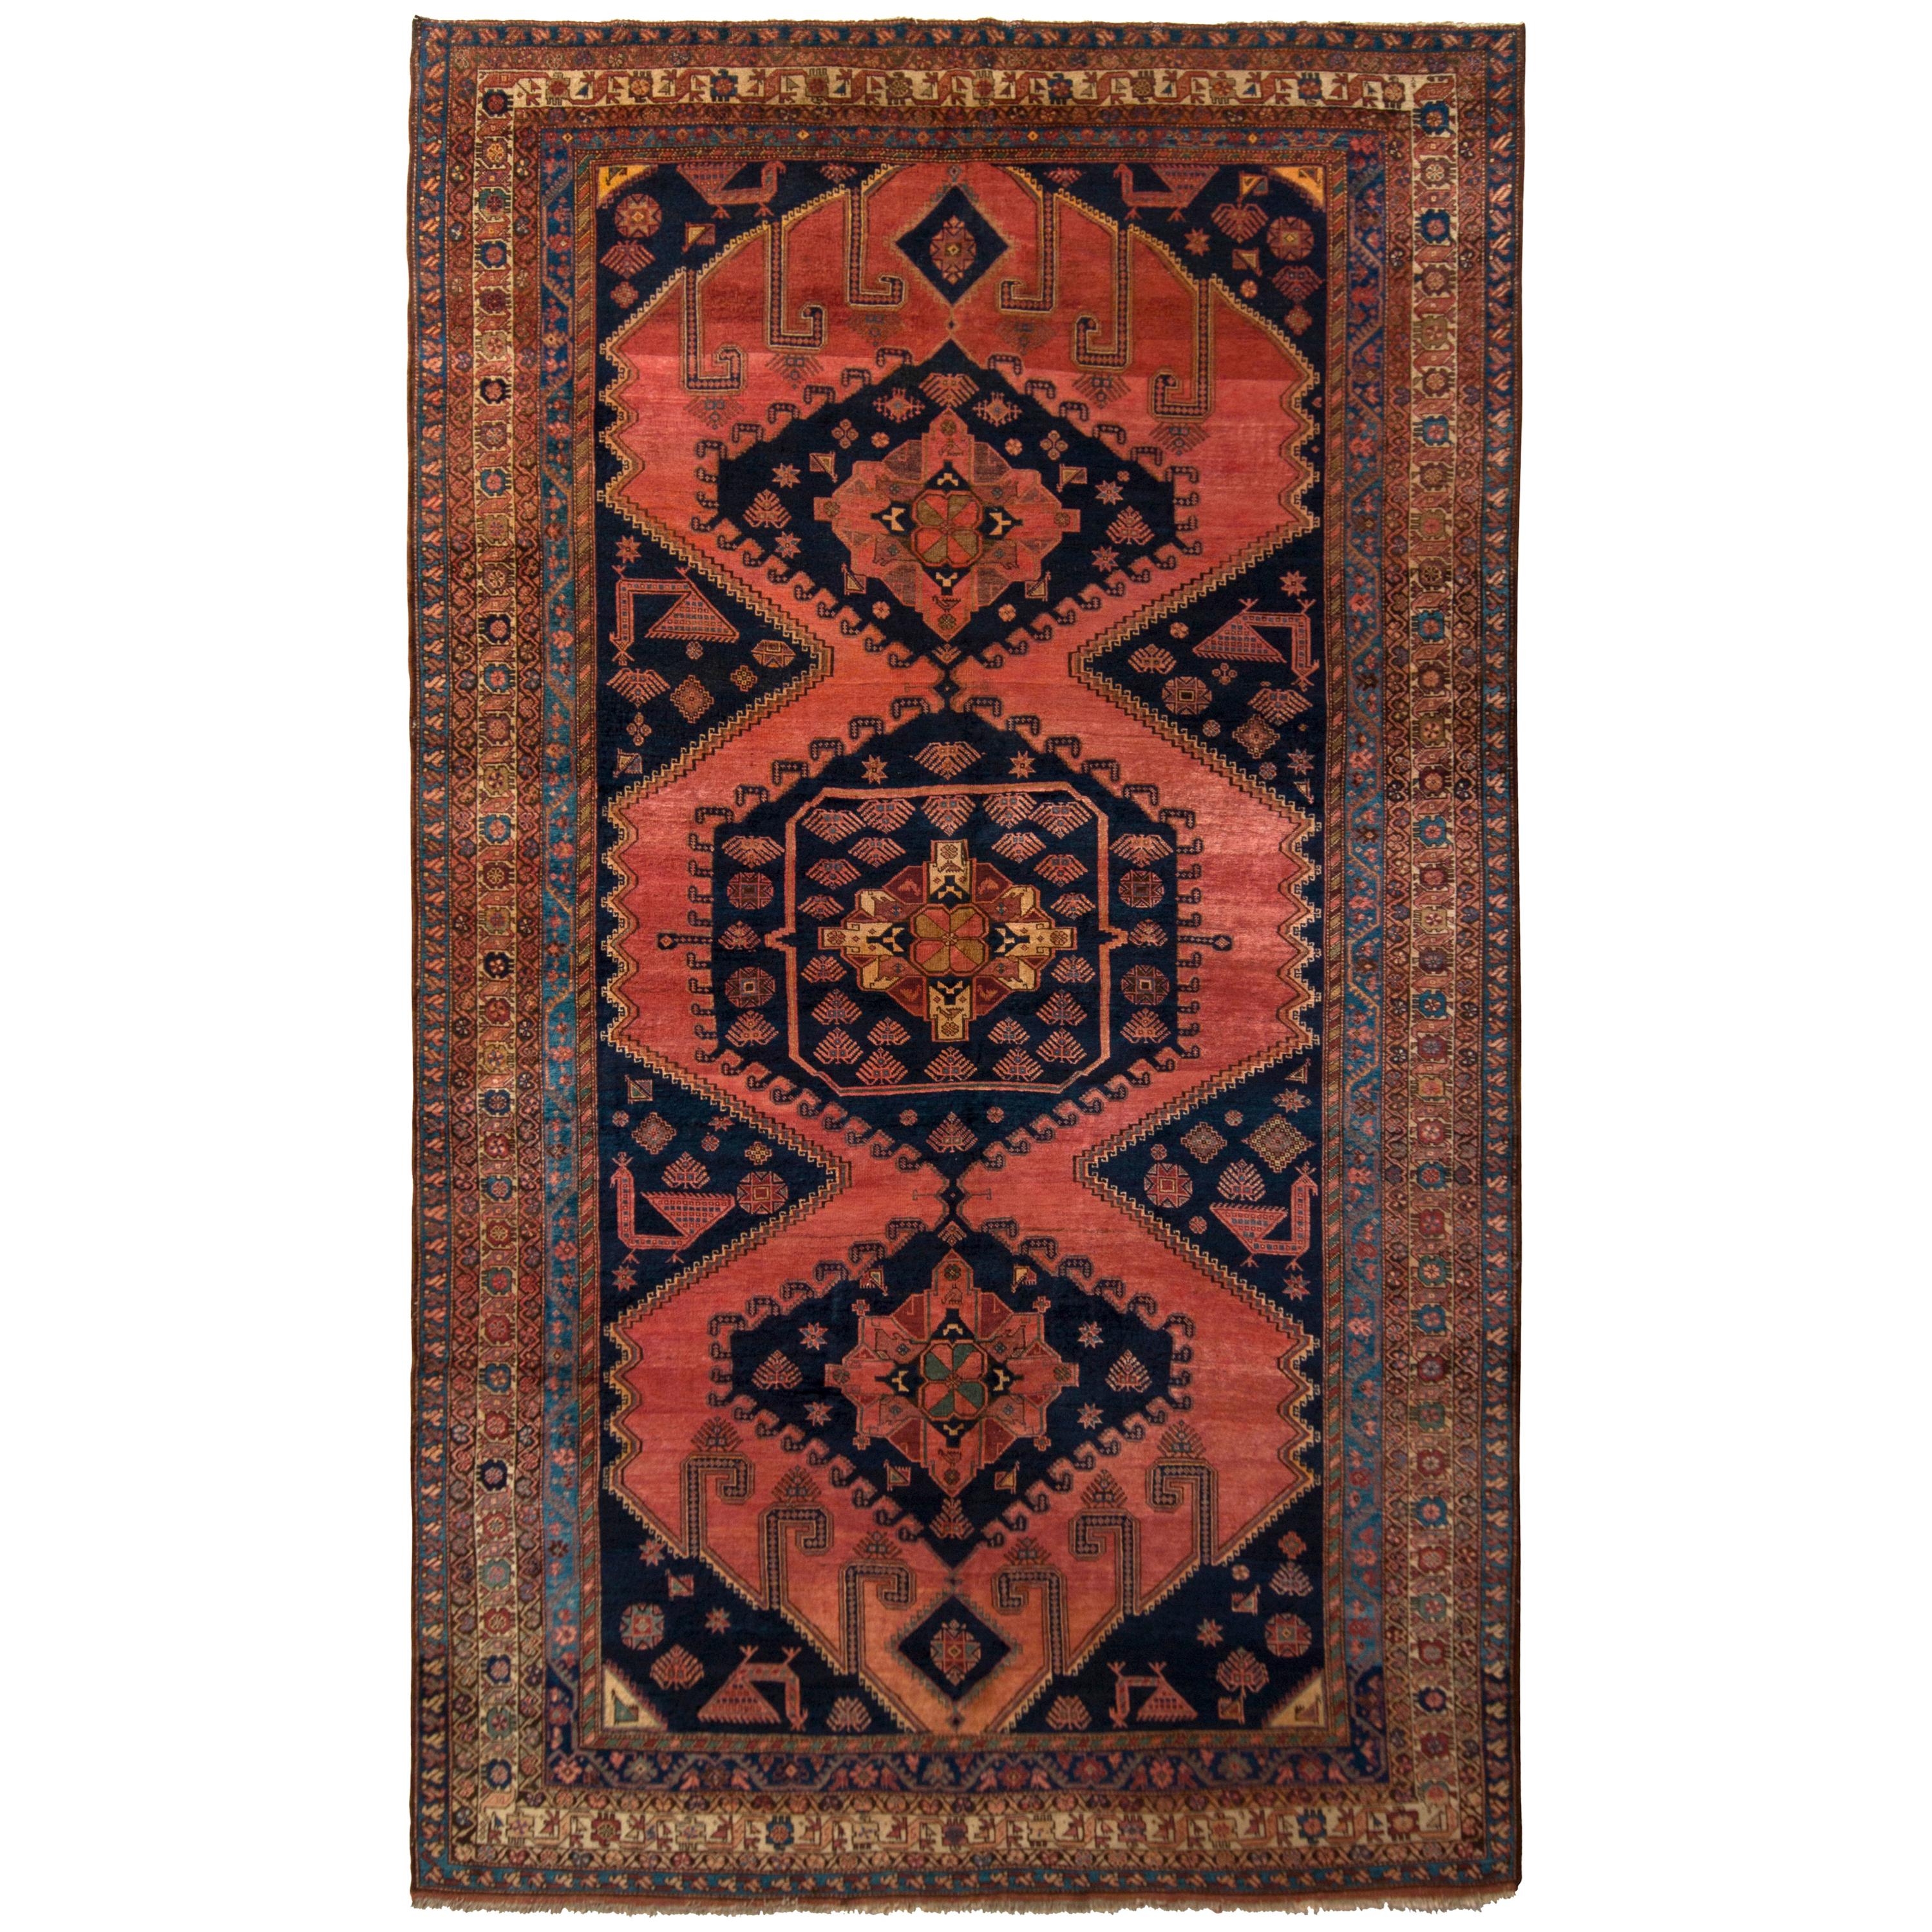 Antique Afshar Persian Rug Red Brown and Blue Geometric Pattern